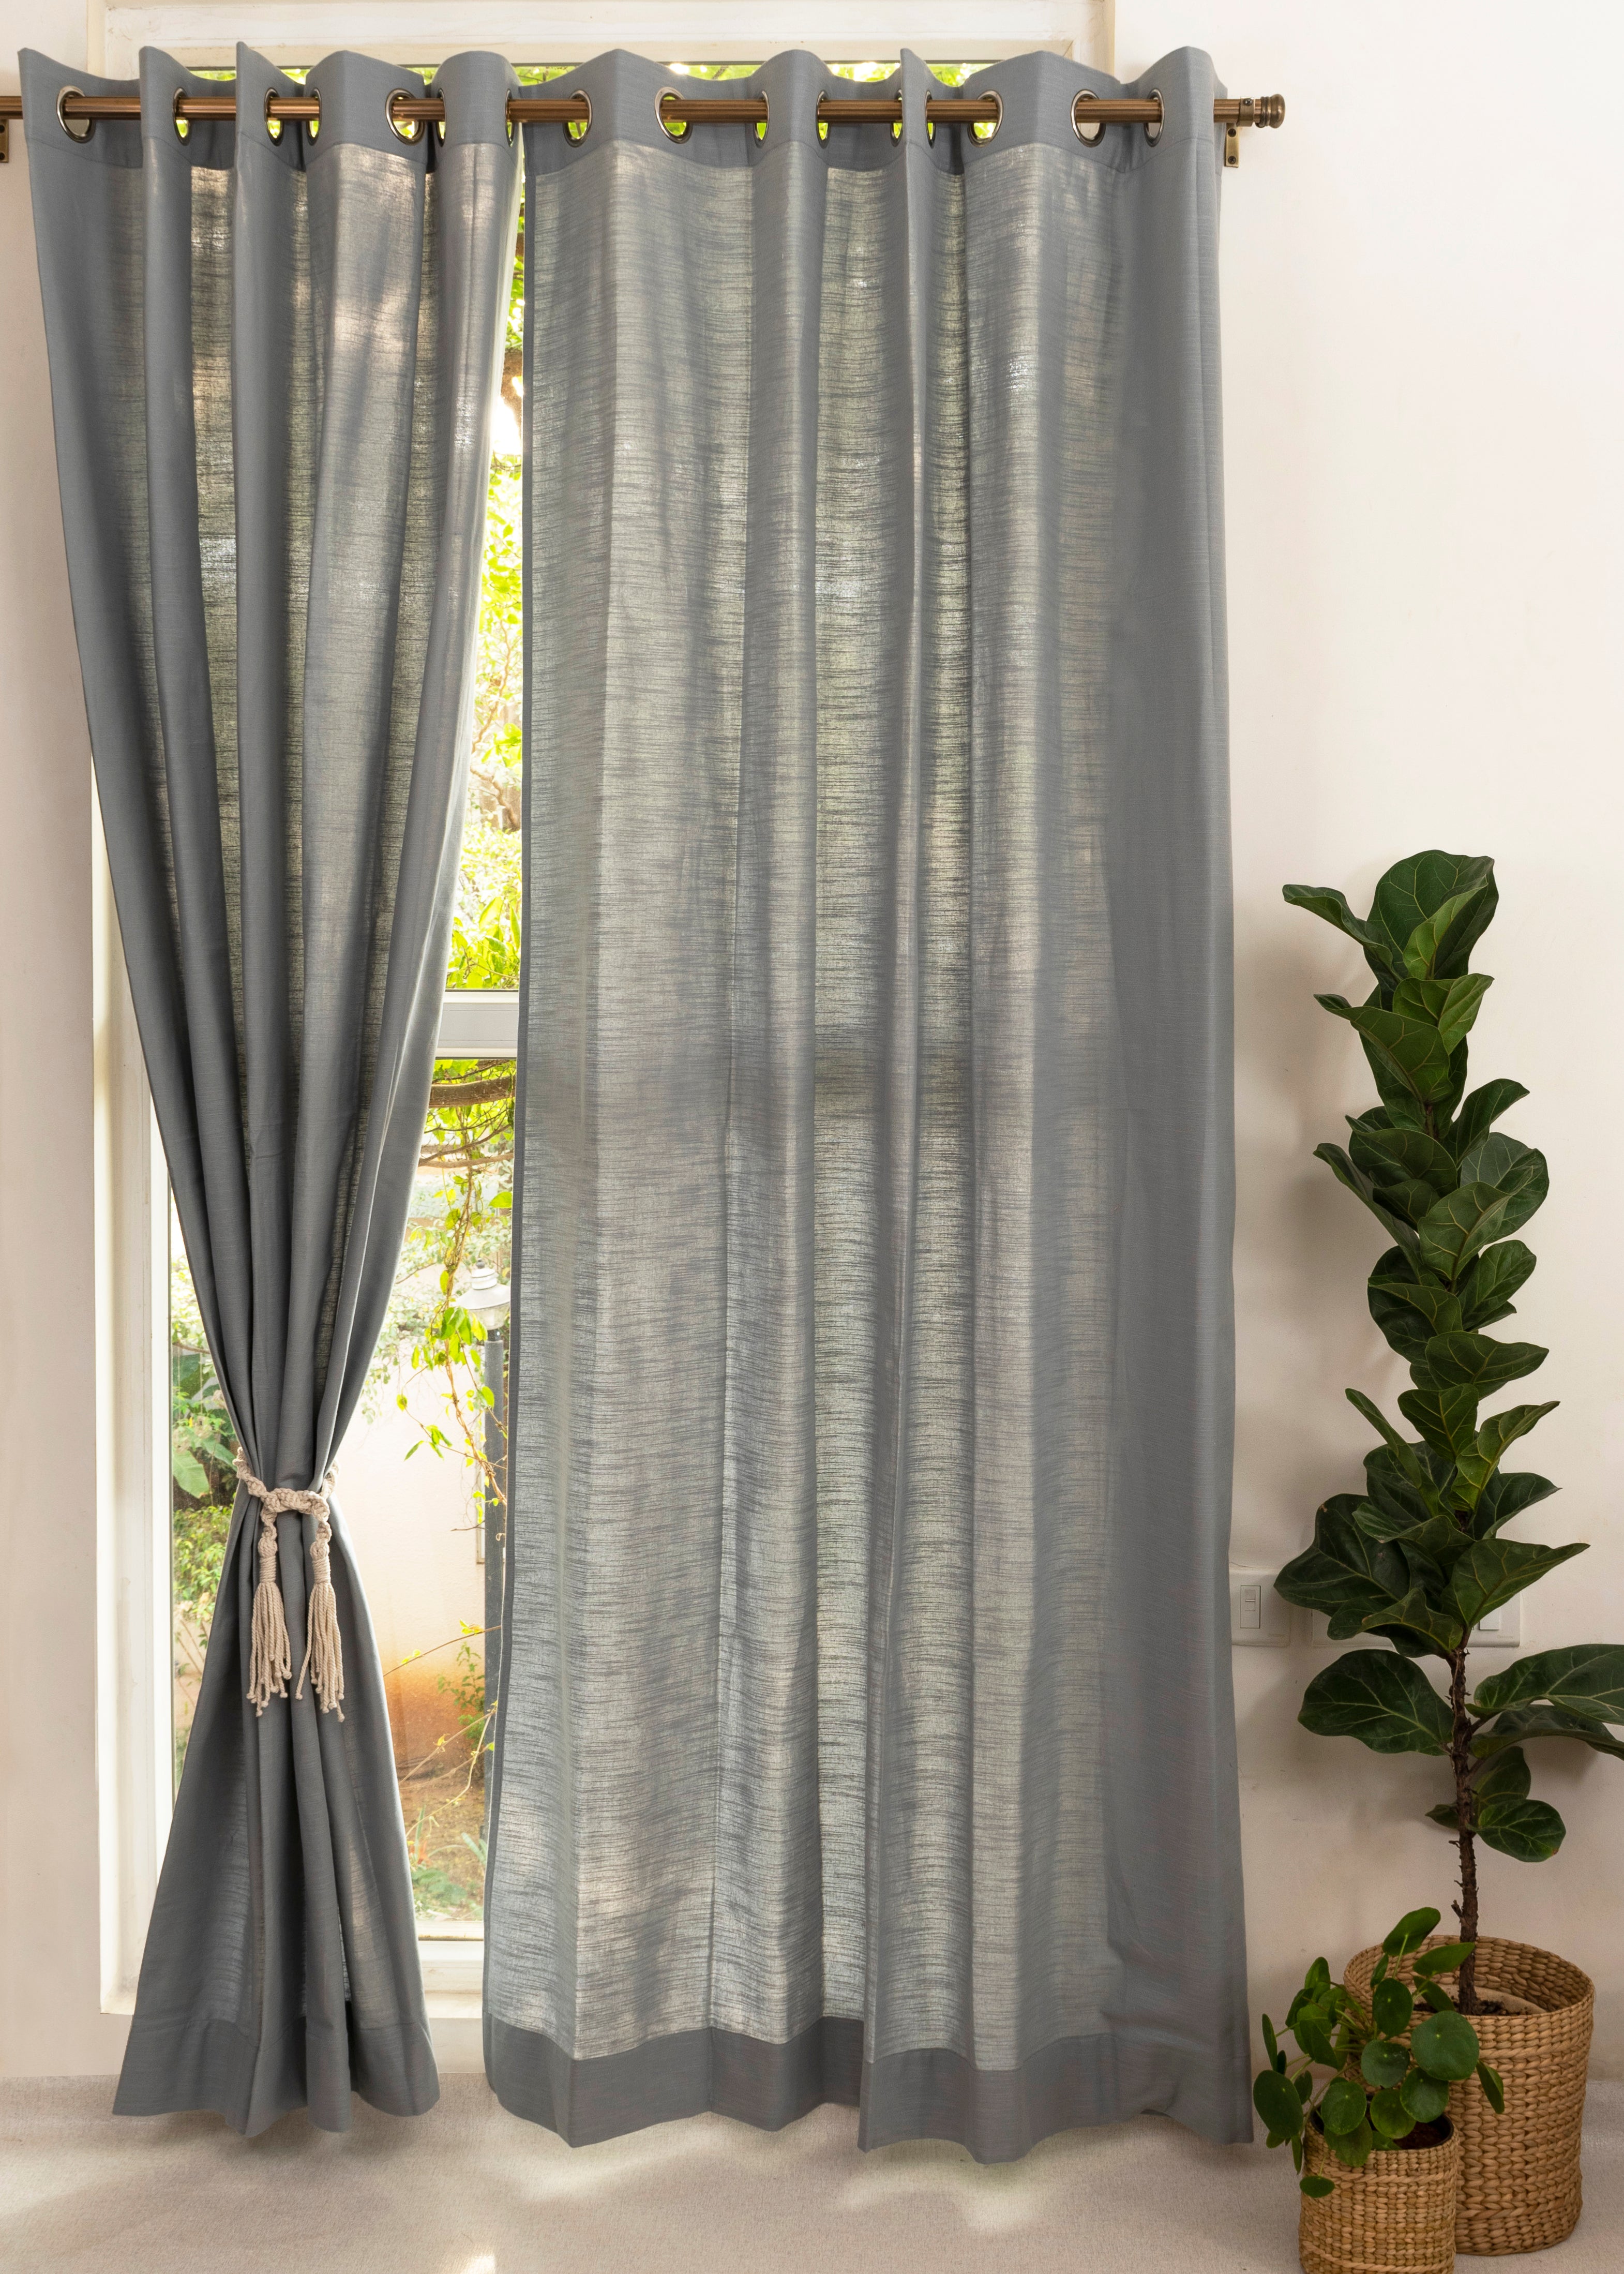 Solid Ultimate grey 100% Customizable Cotton plain curtain for bedroom - Room darkening